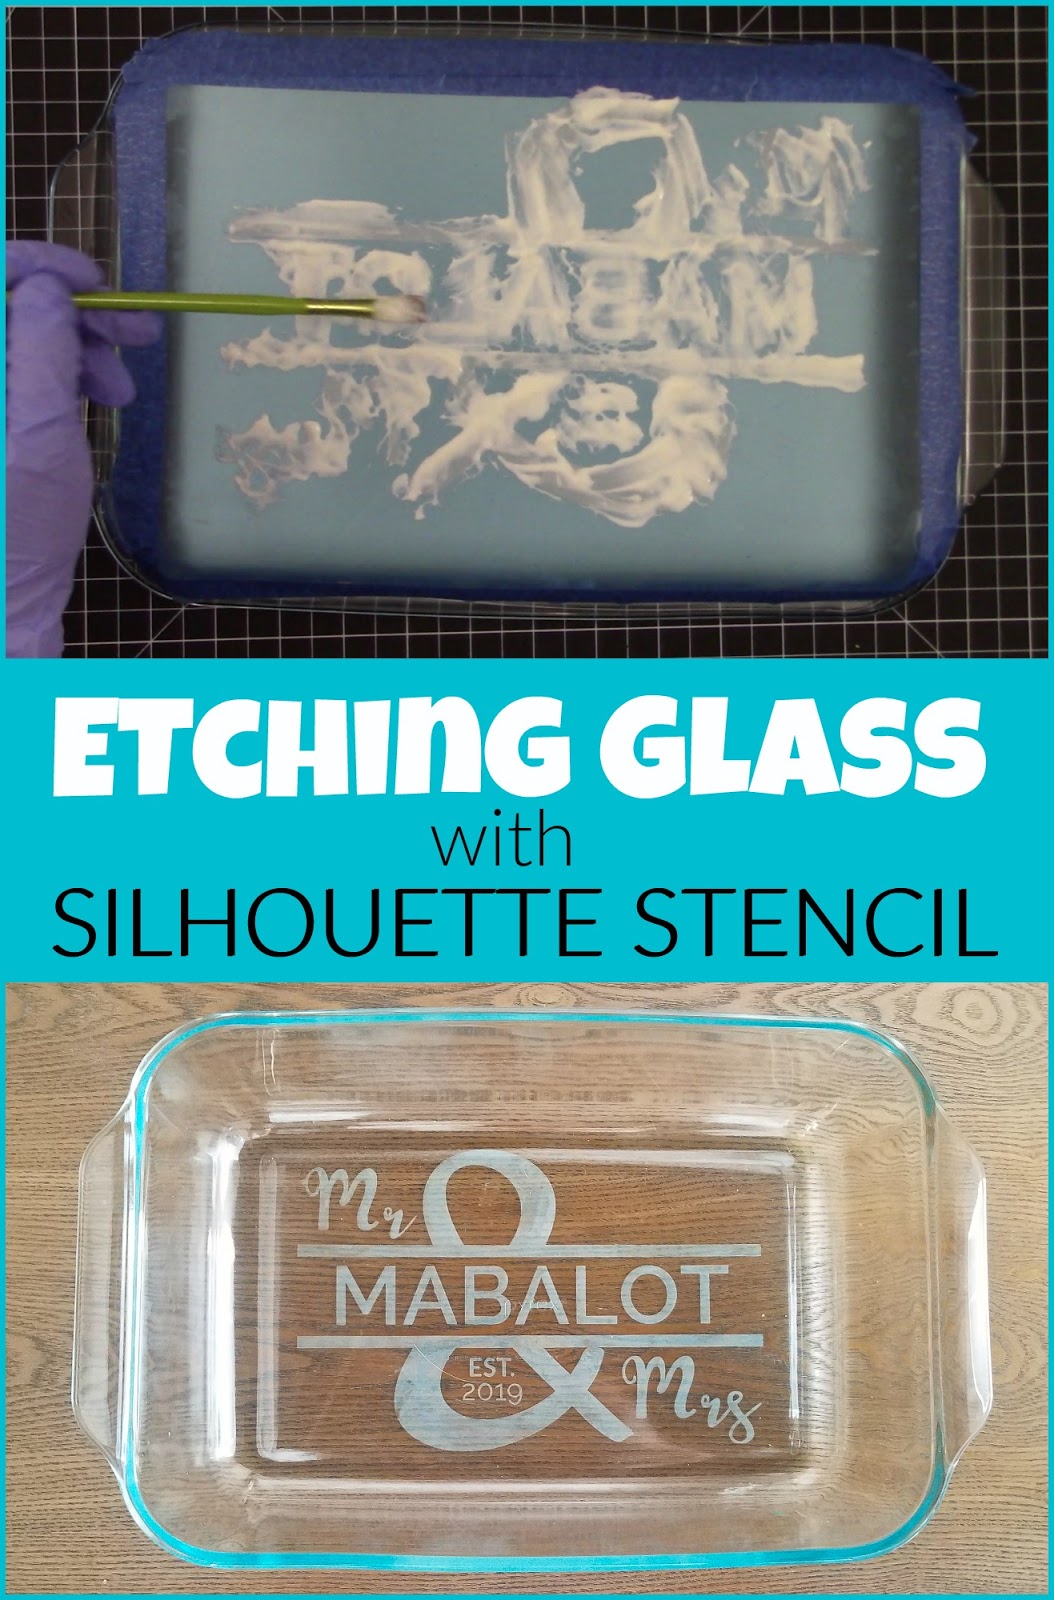 Etch All glass etching paste 118ml silhouette cameo